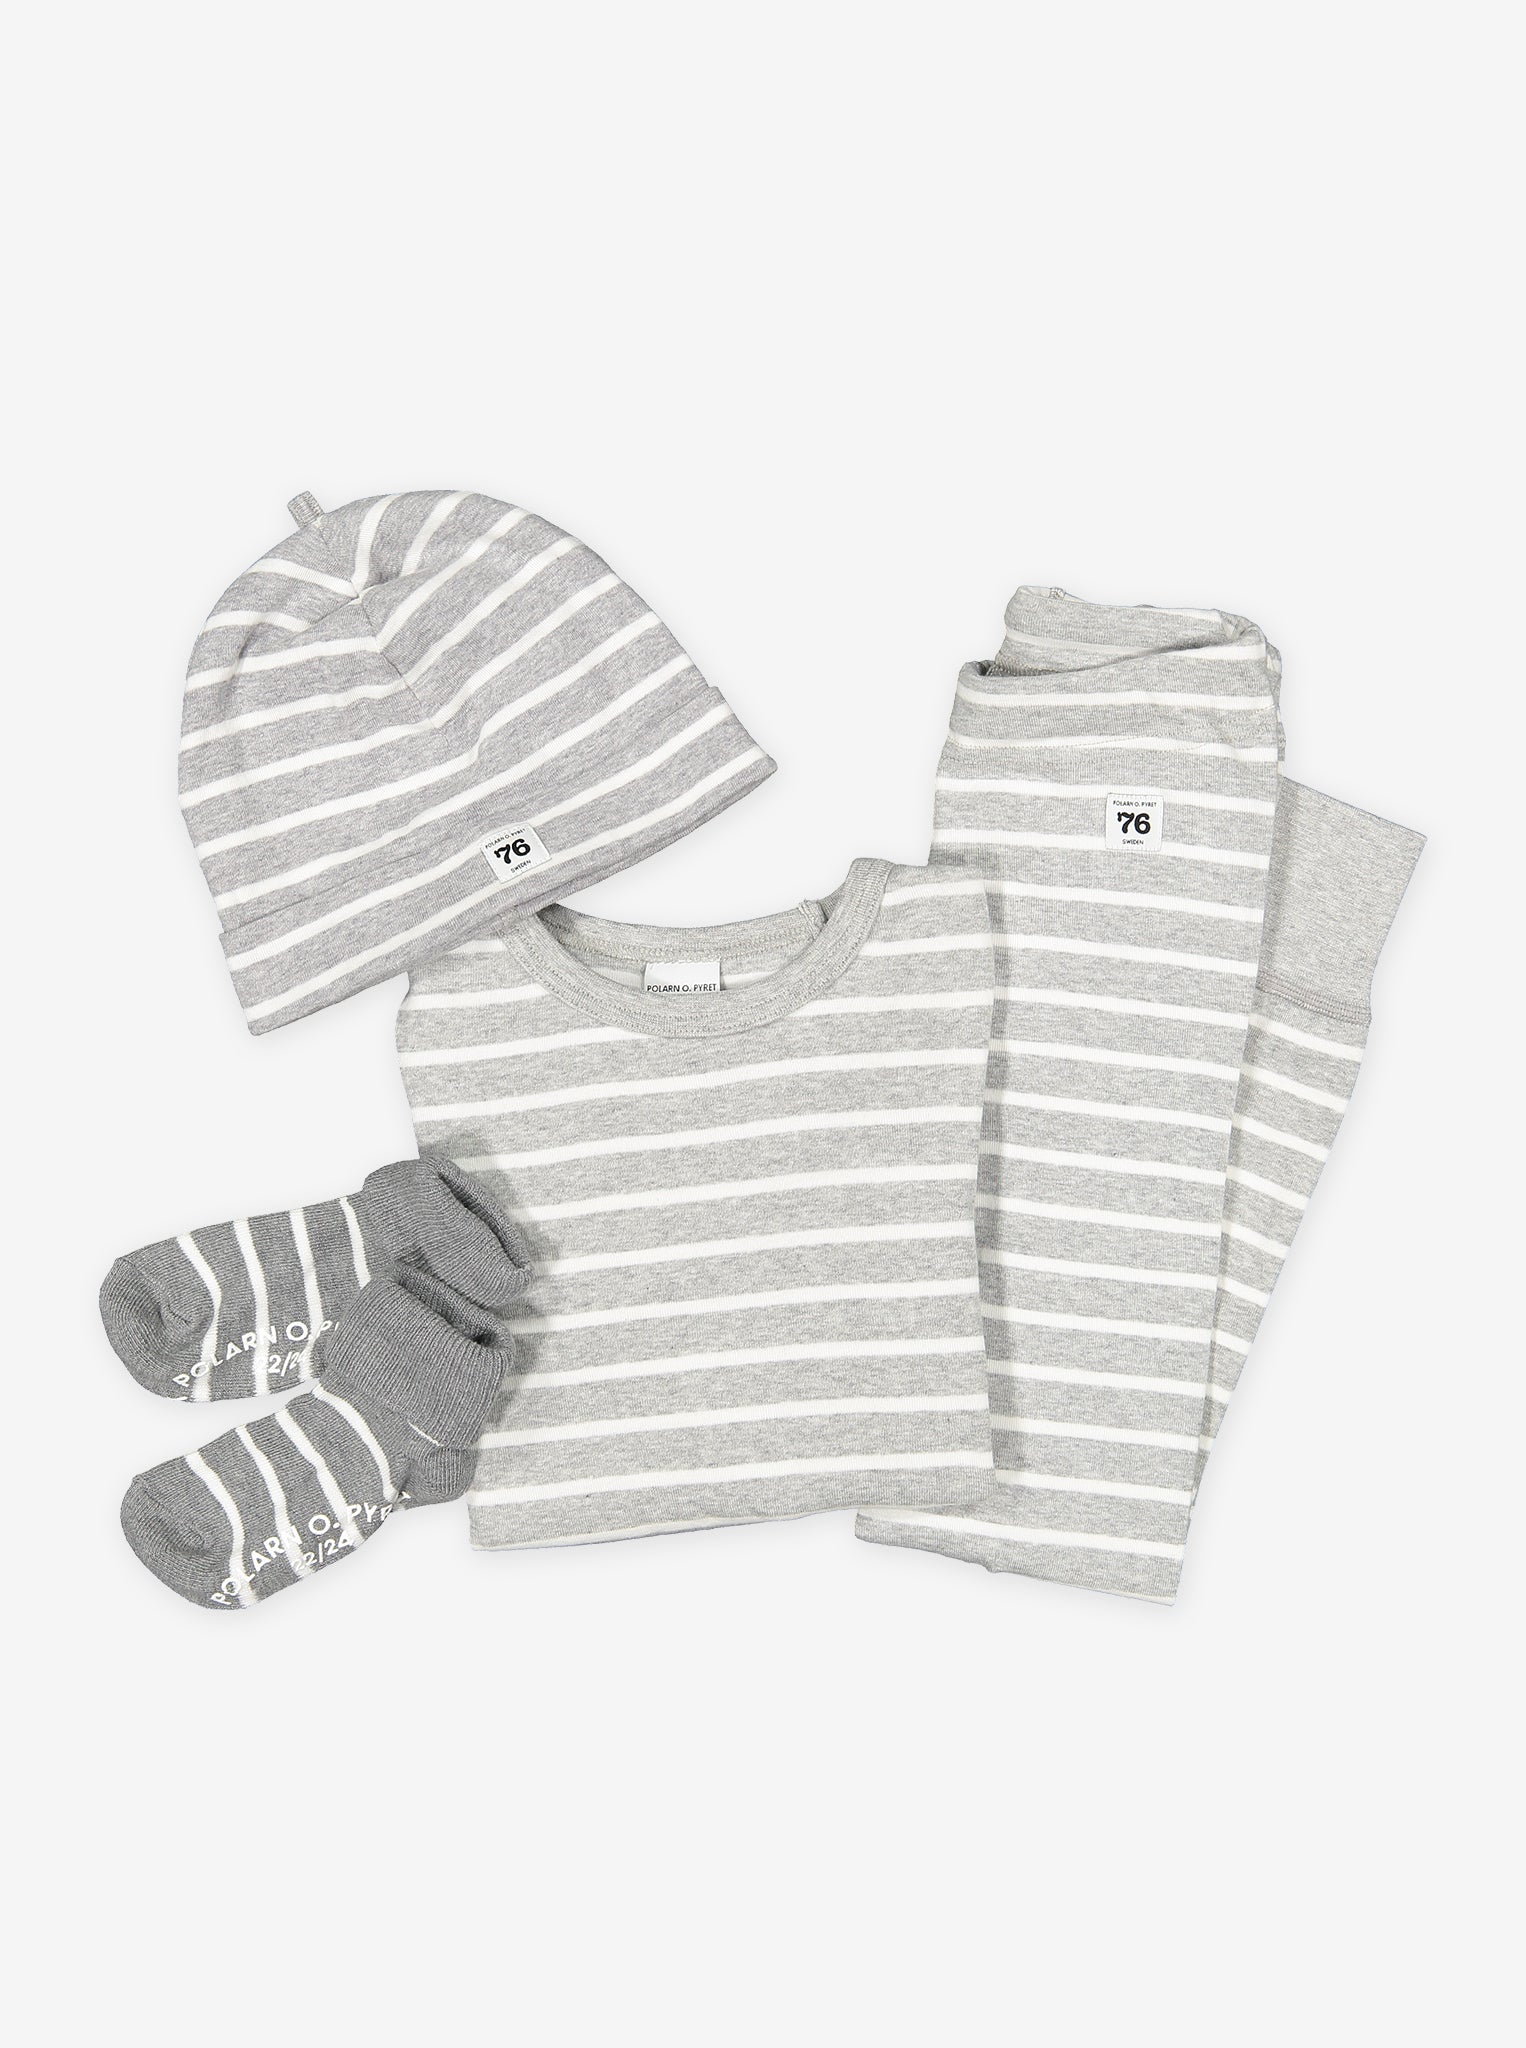 grey and white stripes baby leggings, ethical organic cotton, long lasting polarn o. pyret quality classic products including baby top , hat, leggings and socks 